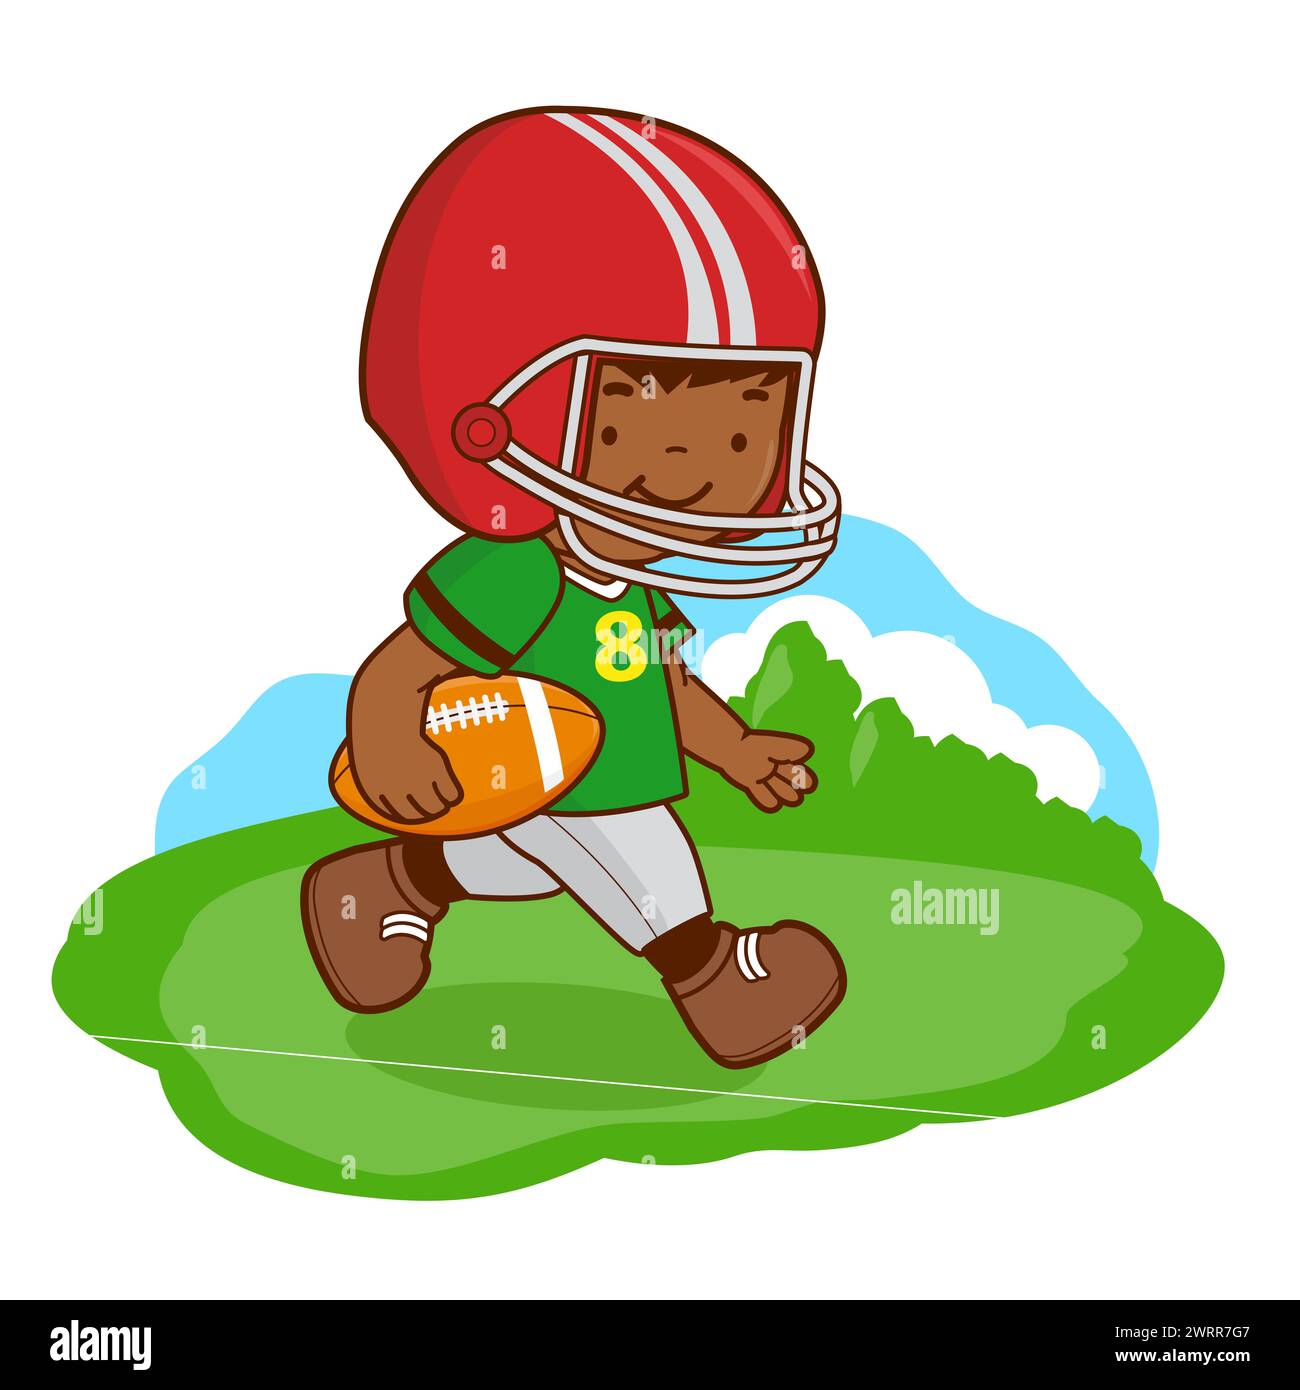 Little boy playing rugby. American football player. Stock Photo